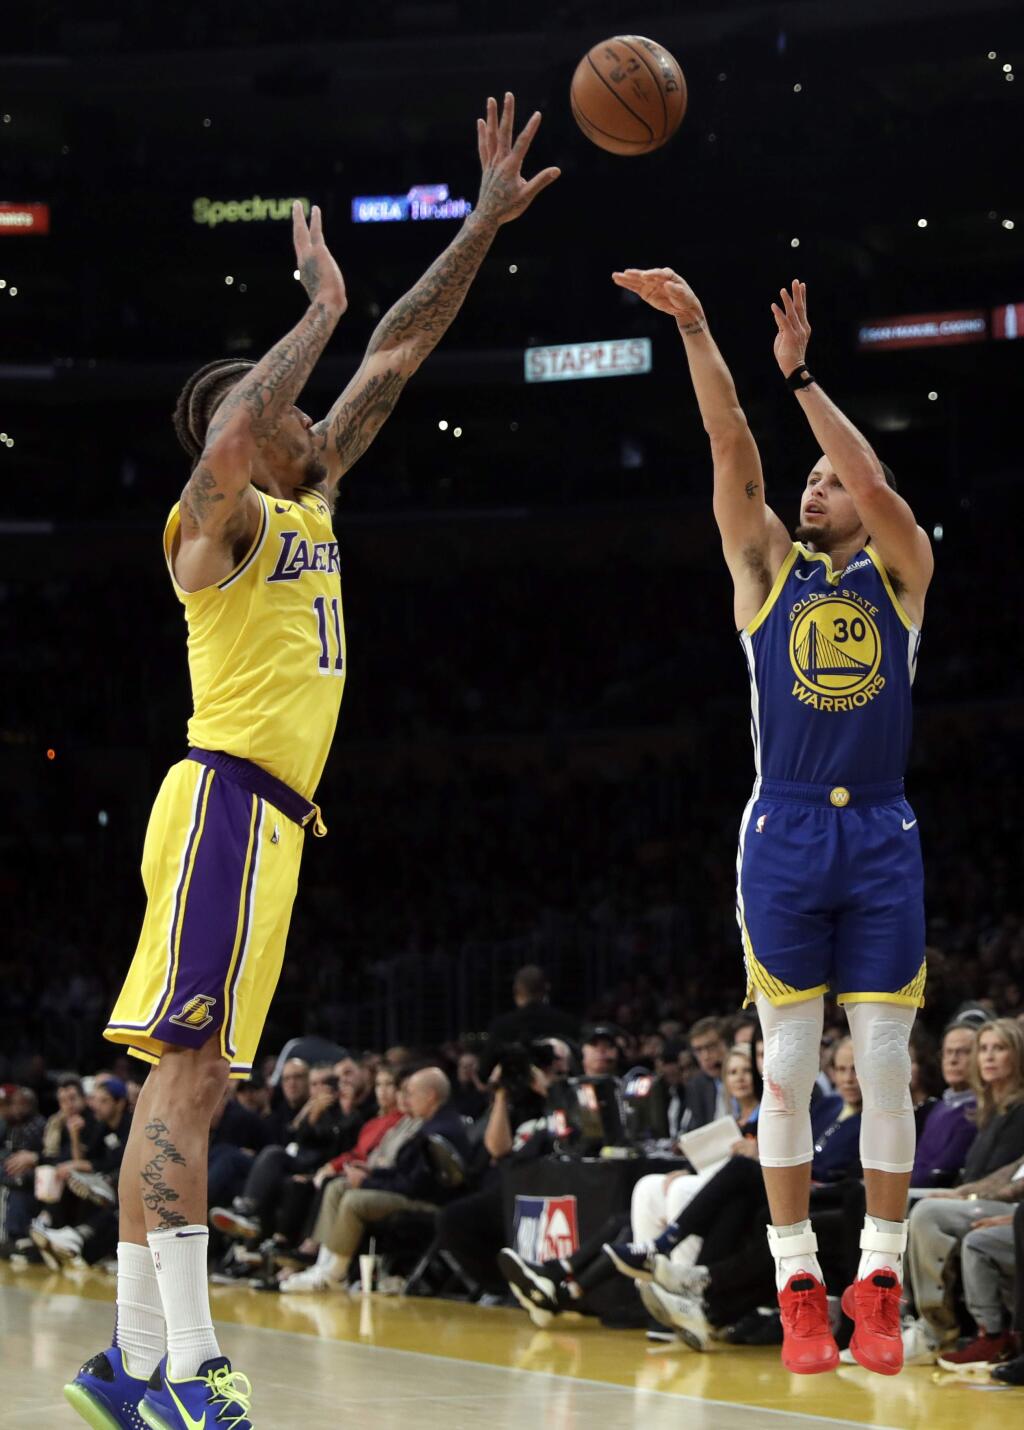 Golden State Warriors' Stephen Curry, right, shoots over Los Angeles Lakers' Michael Beasley during the second half of an NBA basketball game, Monday, Jan. 21, 2019, in Los Angeles. (AP Photo/Marcio Jose Sanchez)